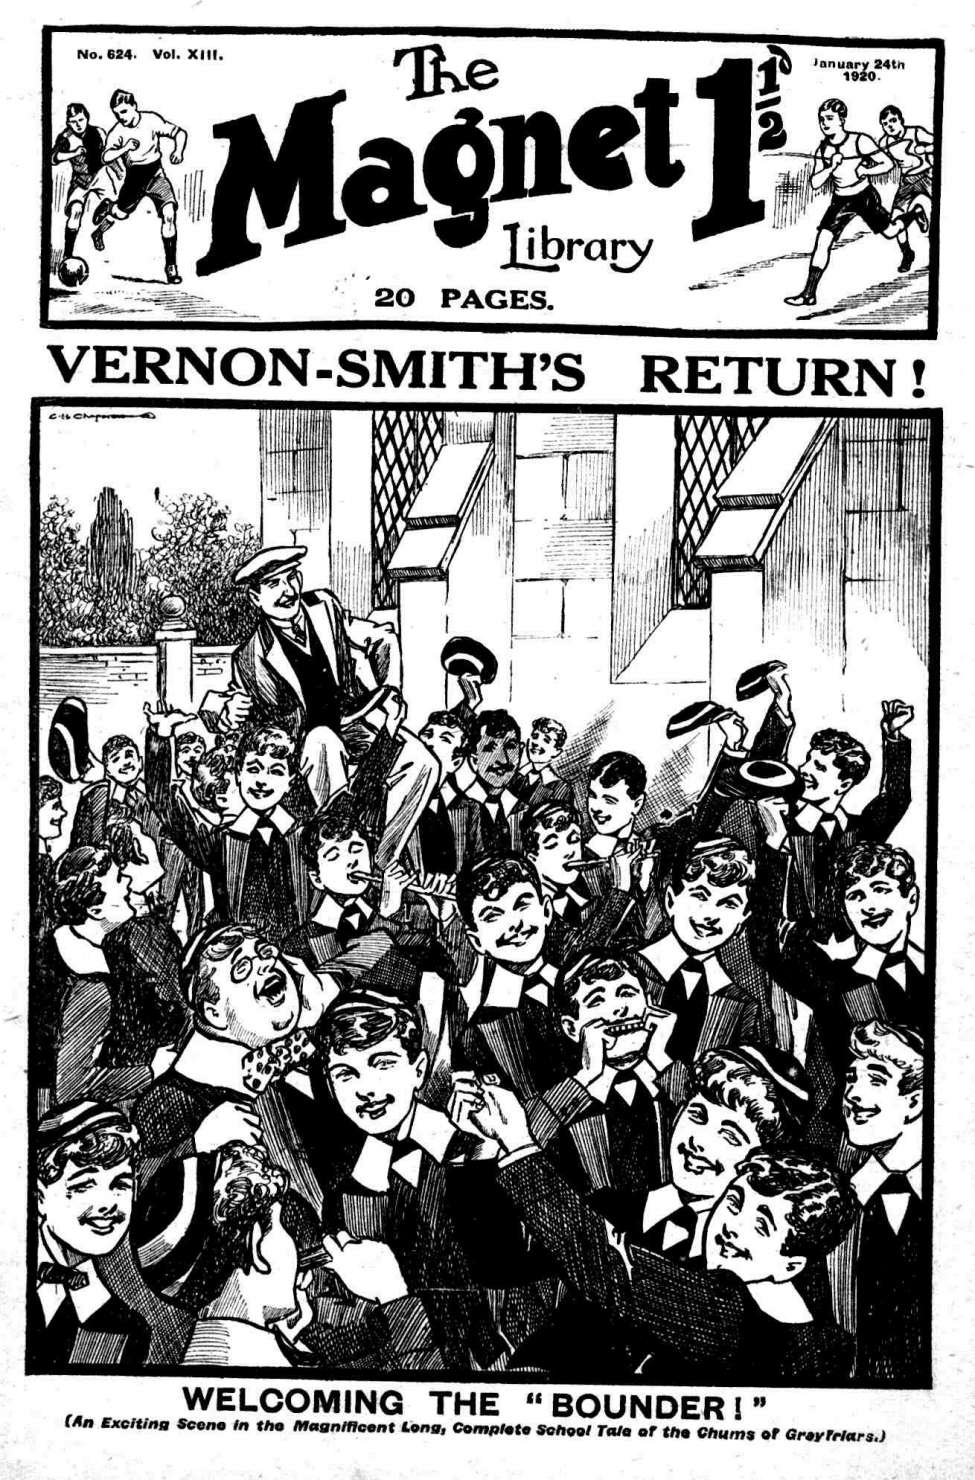 Book Cover For The Magnet 624 - Vernon-Smith's Return